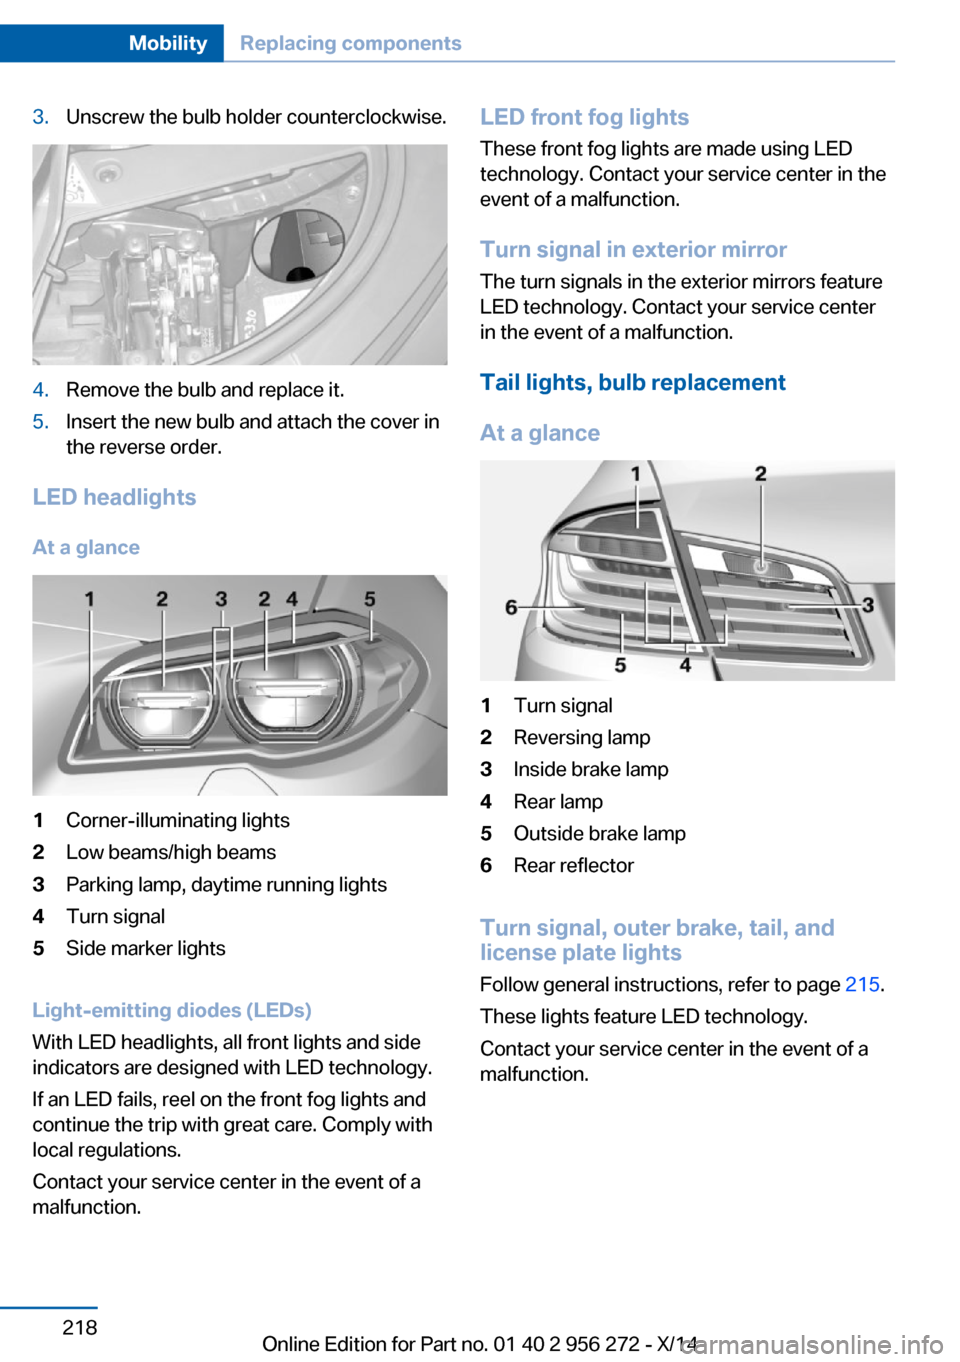 BMW ACTIVE HYBRID 5 2014 F10H Owners Manual 3.Unscrew the bulb holder counterclockwise.4.Remove the bulb and replace it.5.Insert the new bulb and attach the cover in
the reverse order.
LED headlights
At a glance
1Corner-illuminating lights2Low 